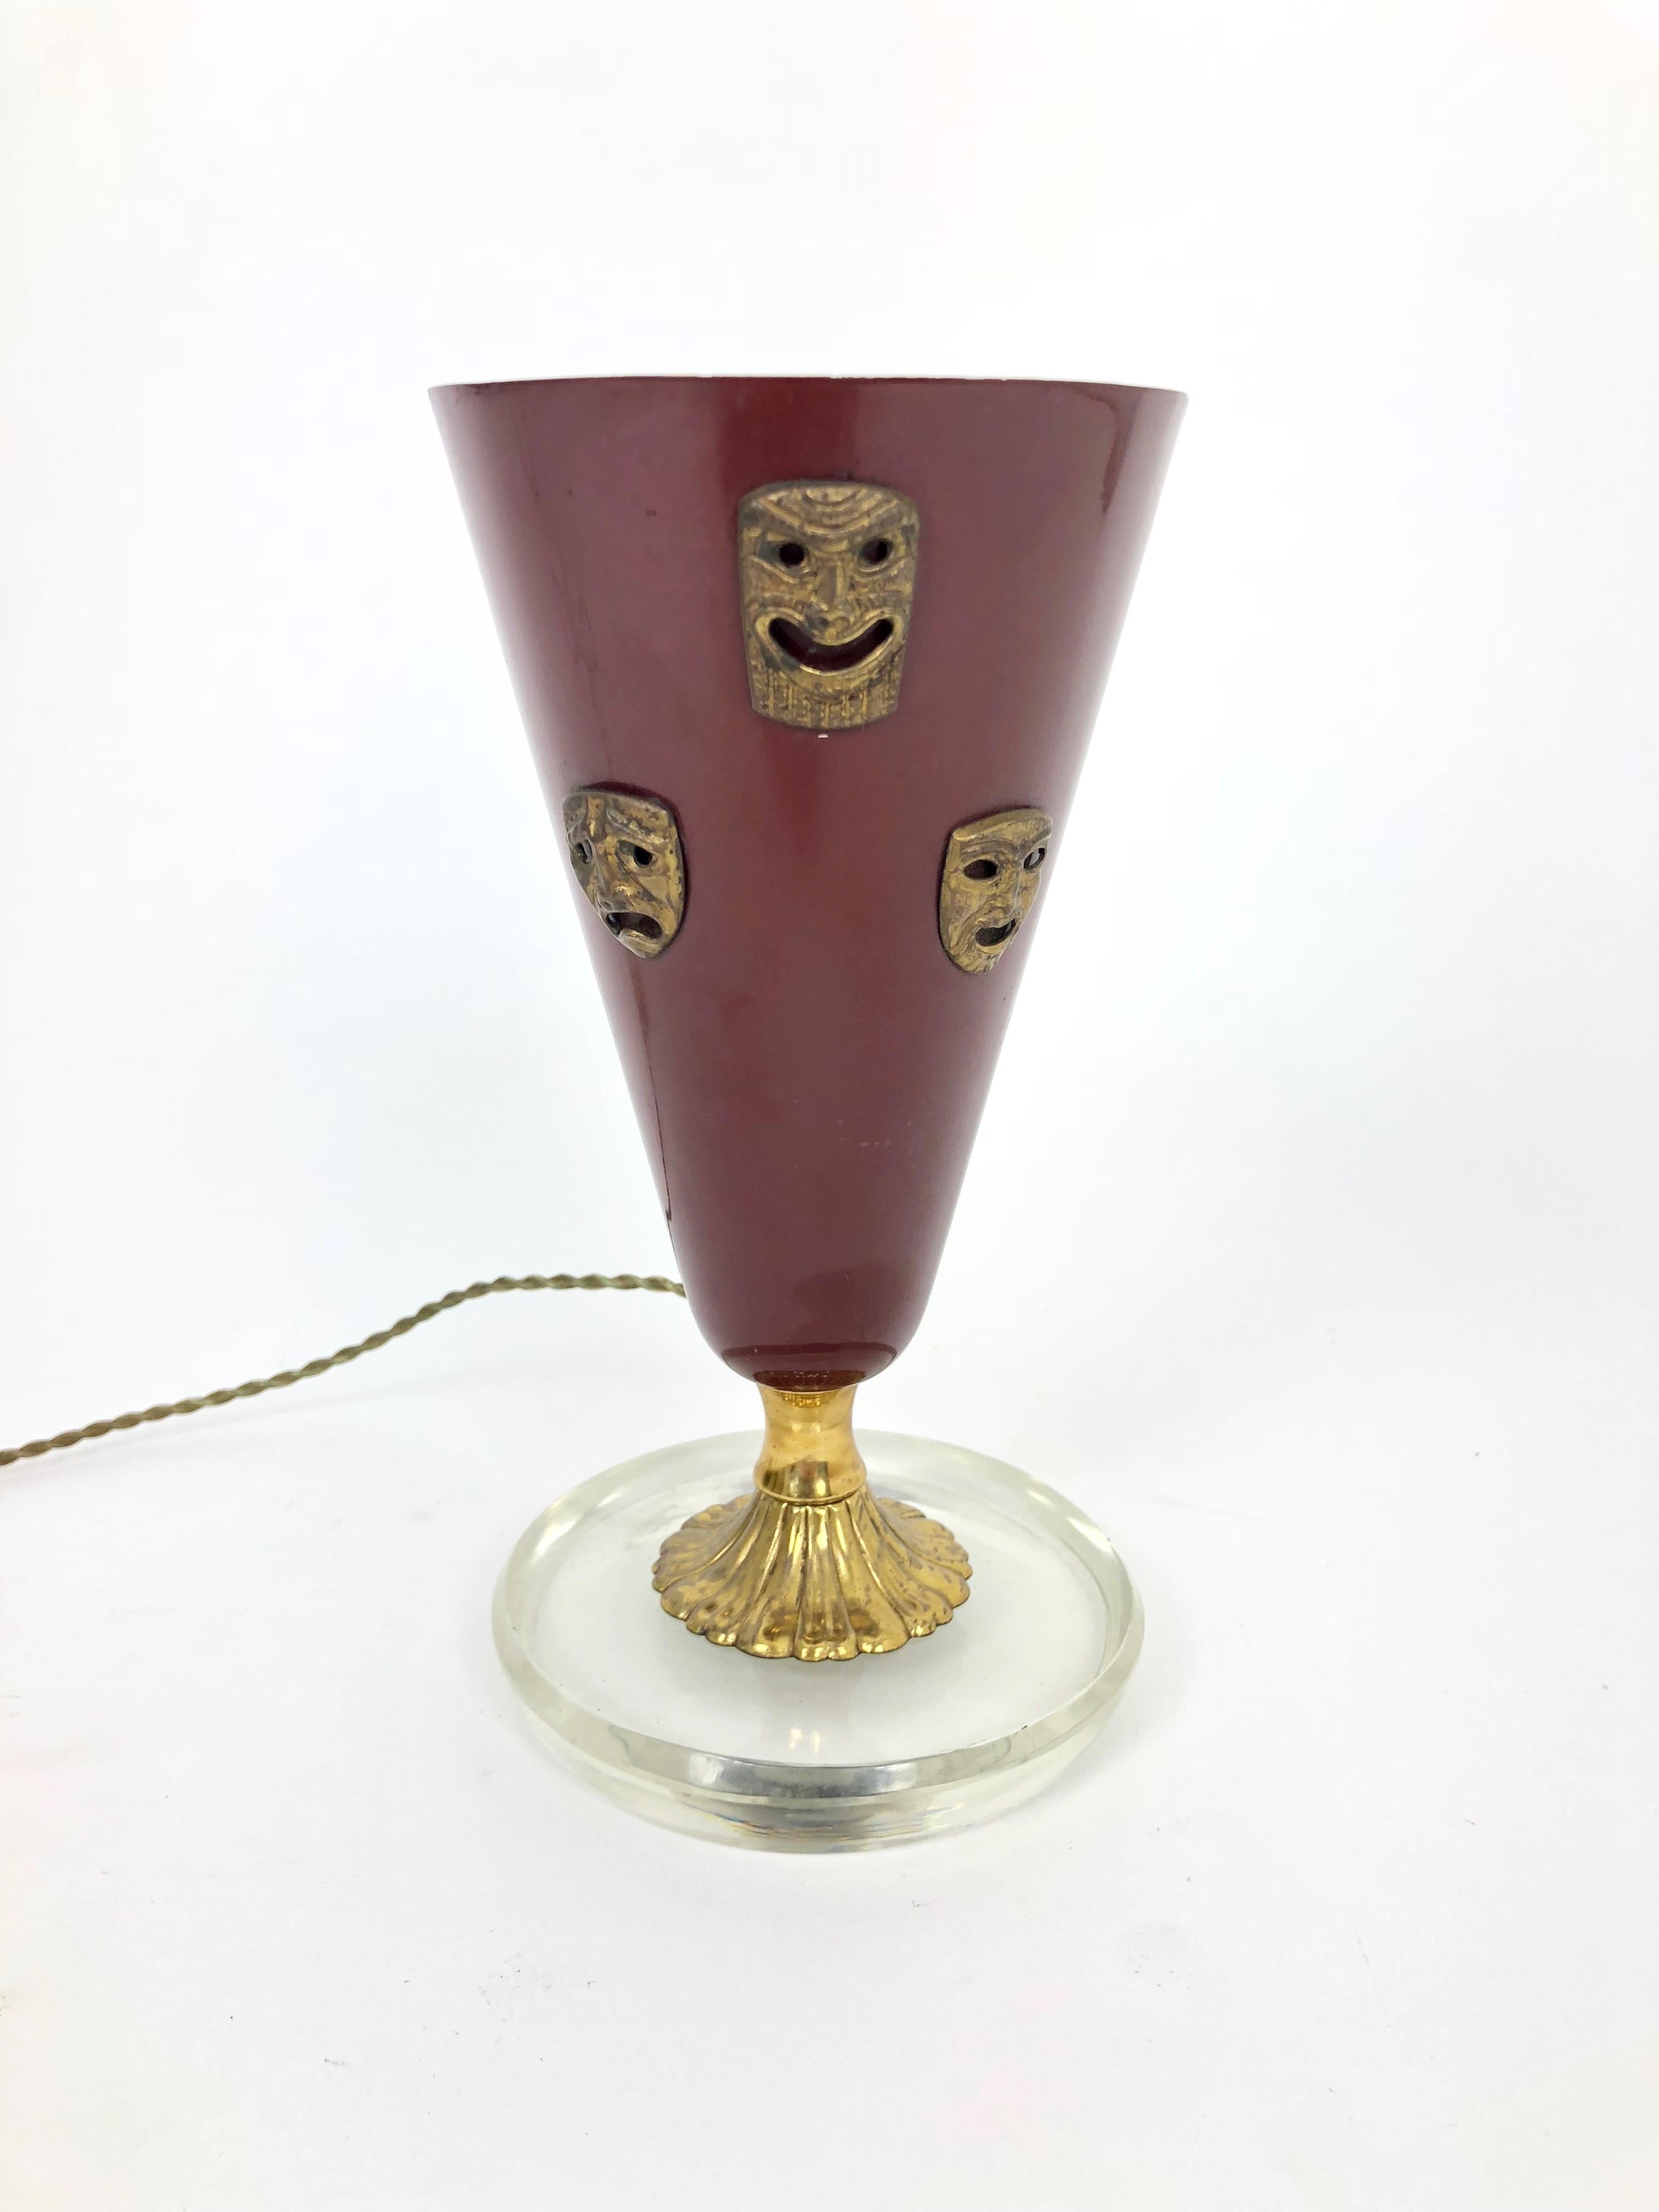 This table lamp represents the Comedy and Tragedy masks, made of brass on a surface of steel, and stands on a massive glass plate.
The item's style recalls the one of Gio Ponti.